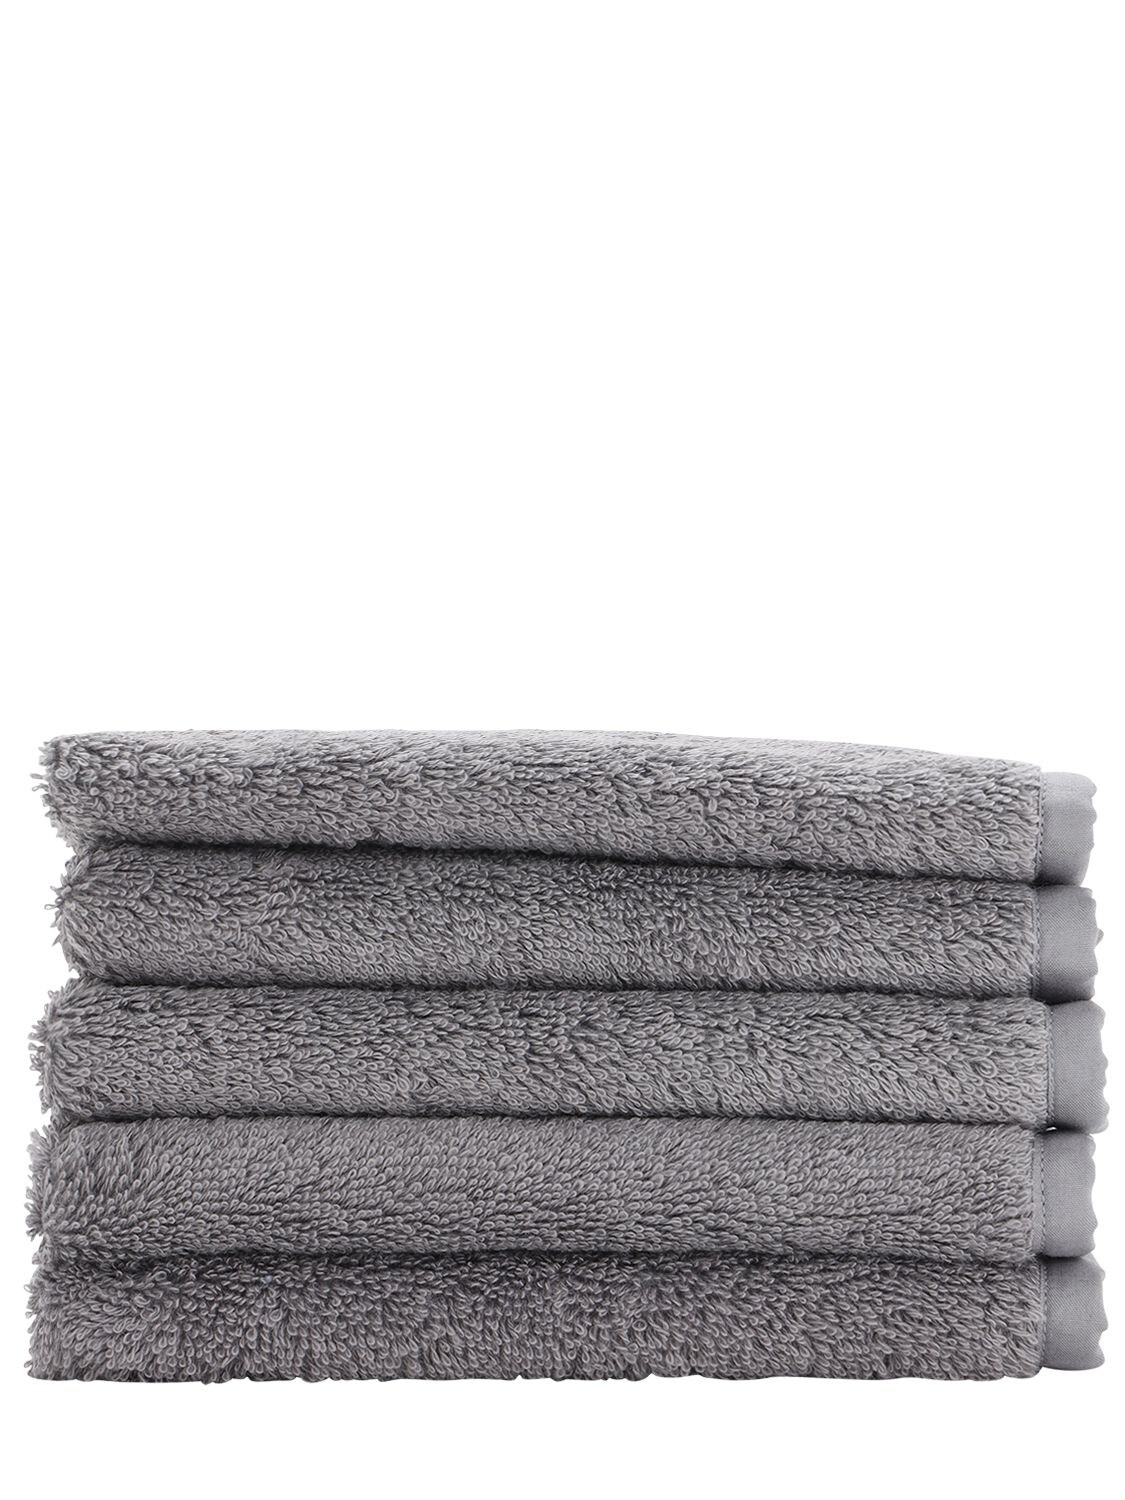 Alessandro Di Marco Set Of 5 Cotton Terrycloth Washcloths In Grey,white